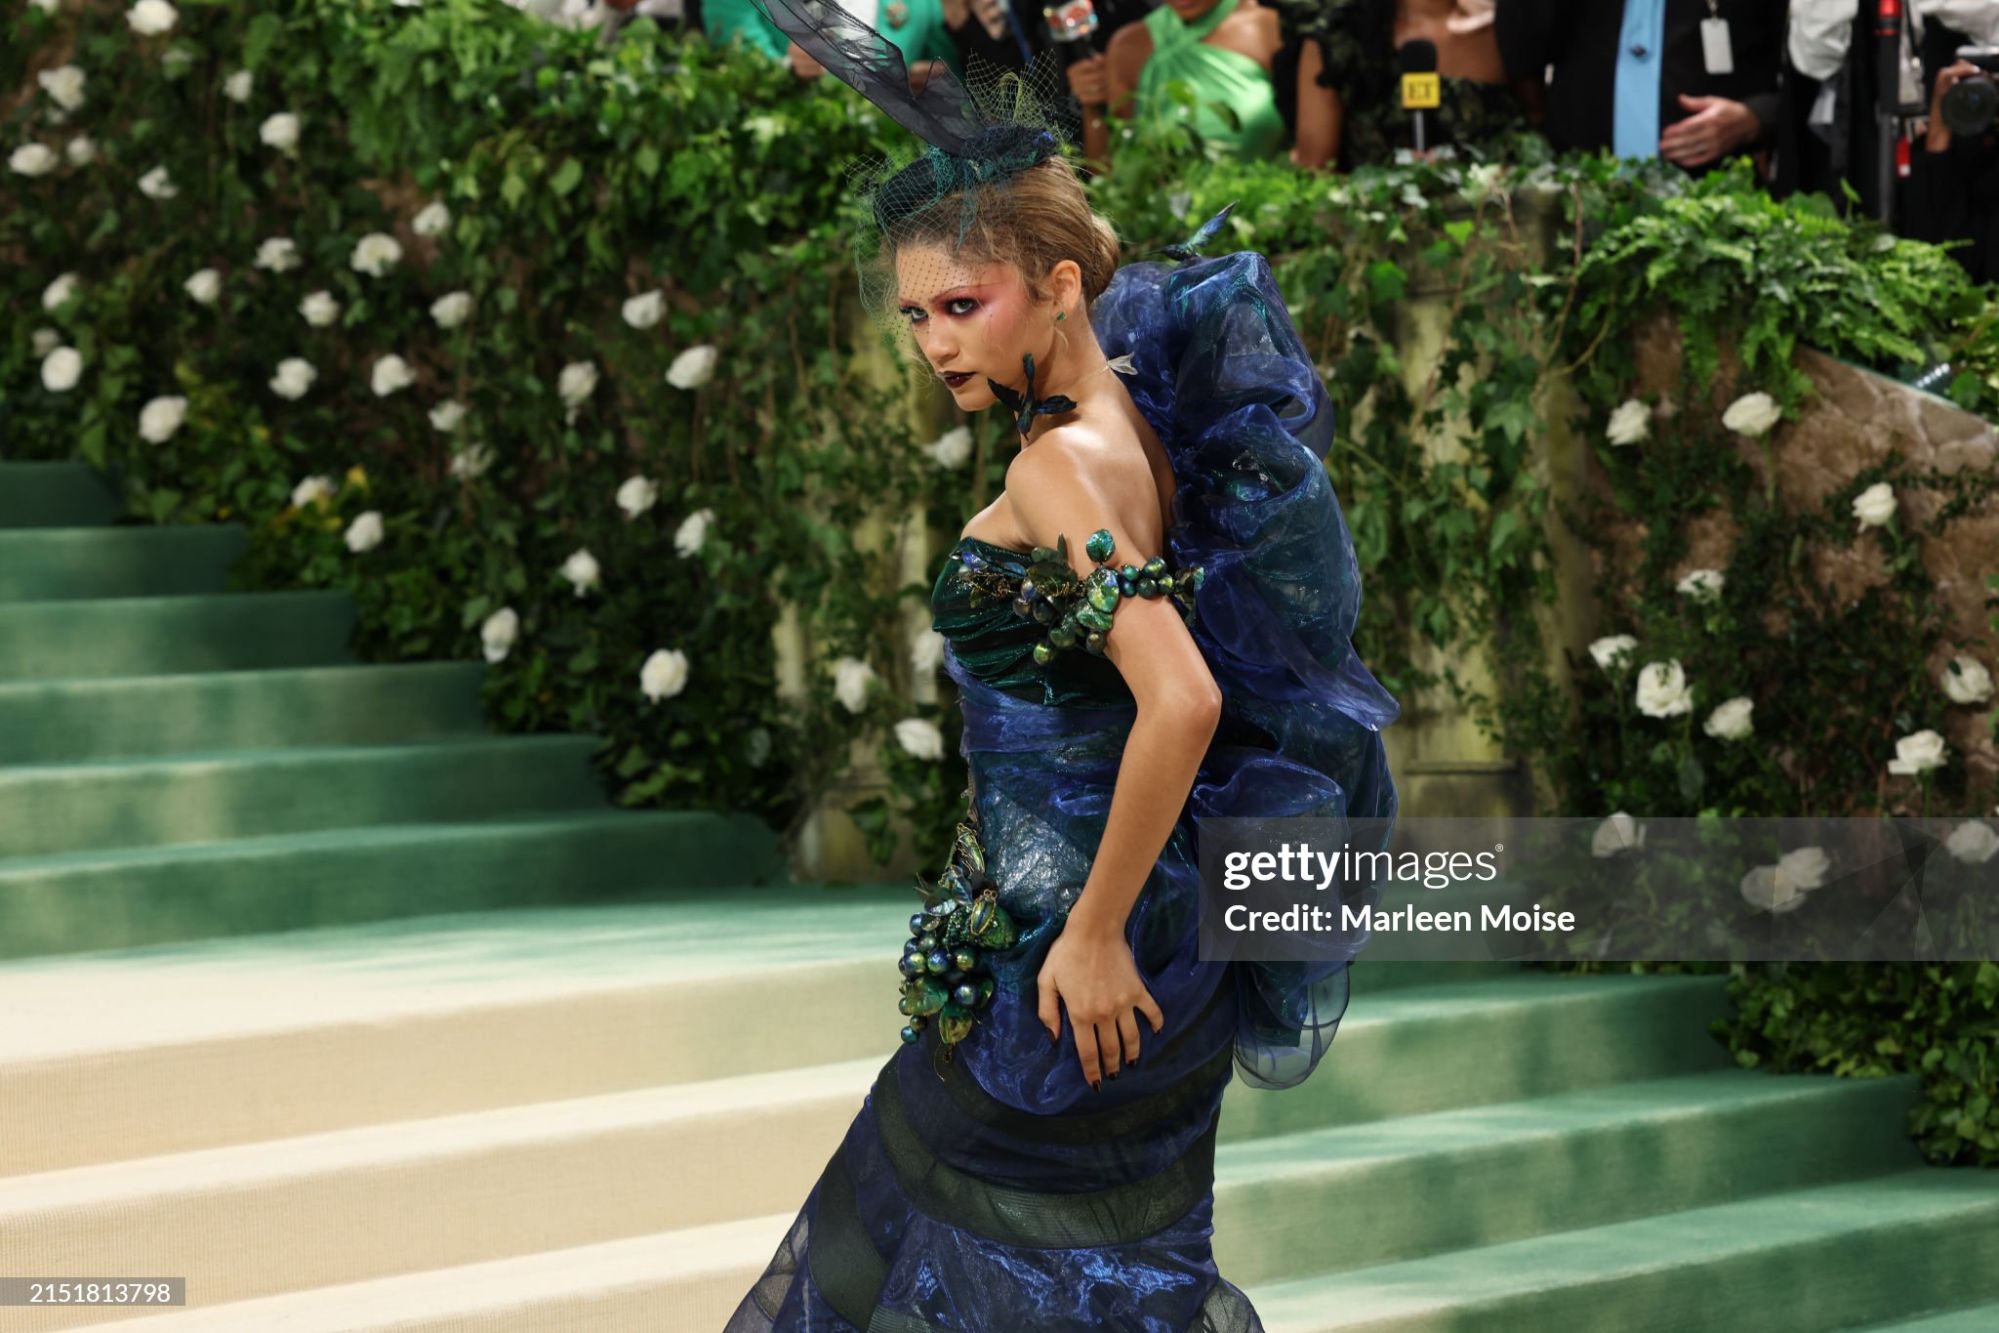 gettyimages-2151813798-2048x2048.jpg